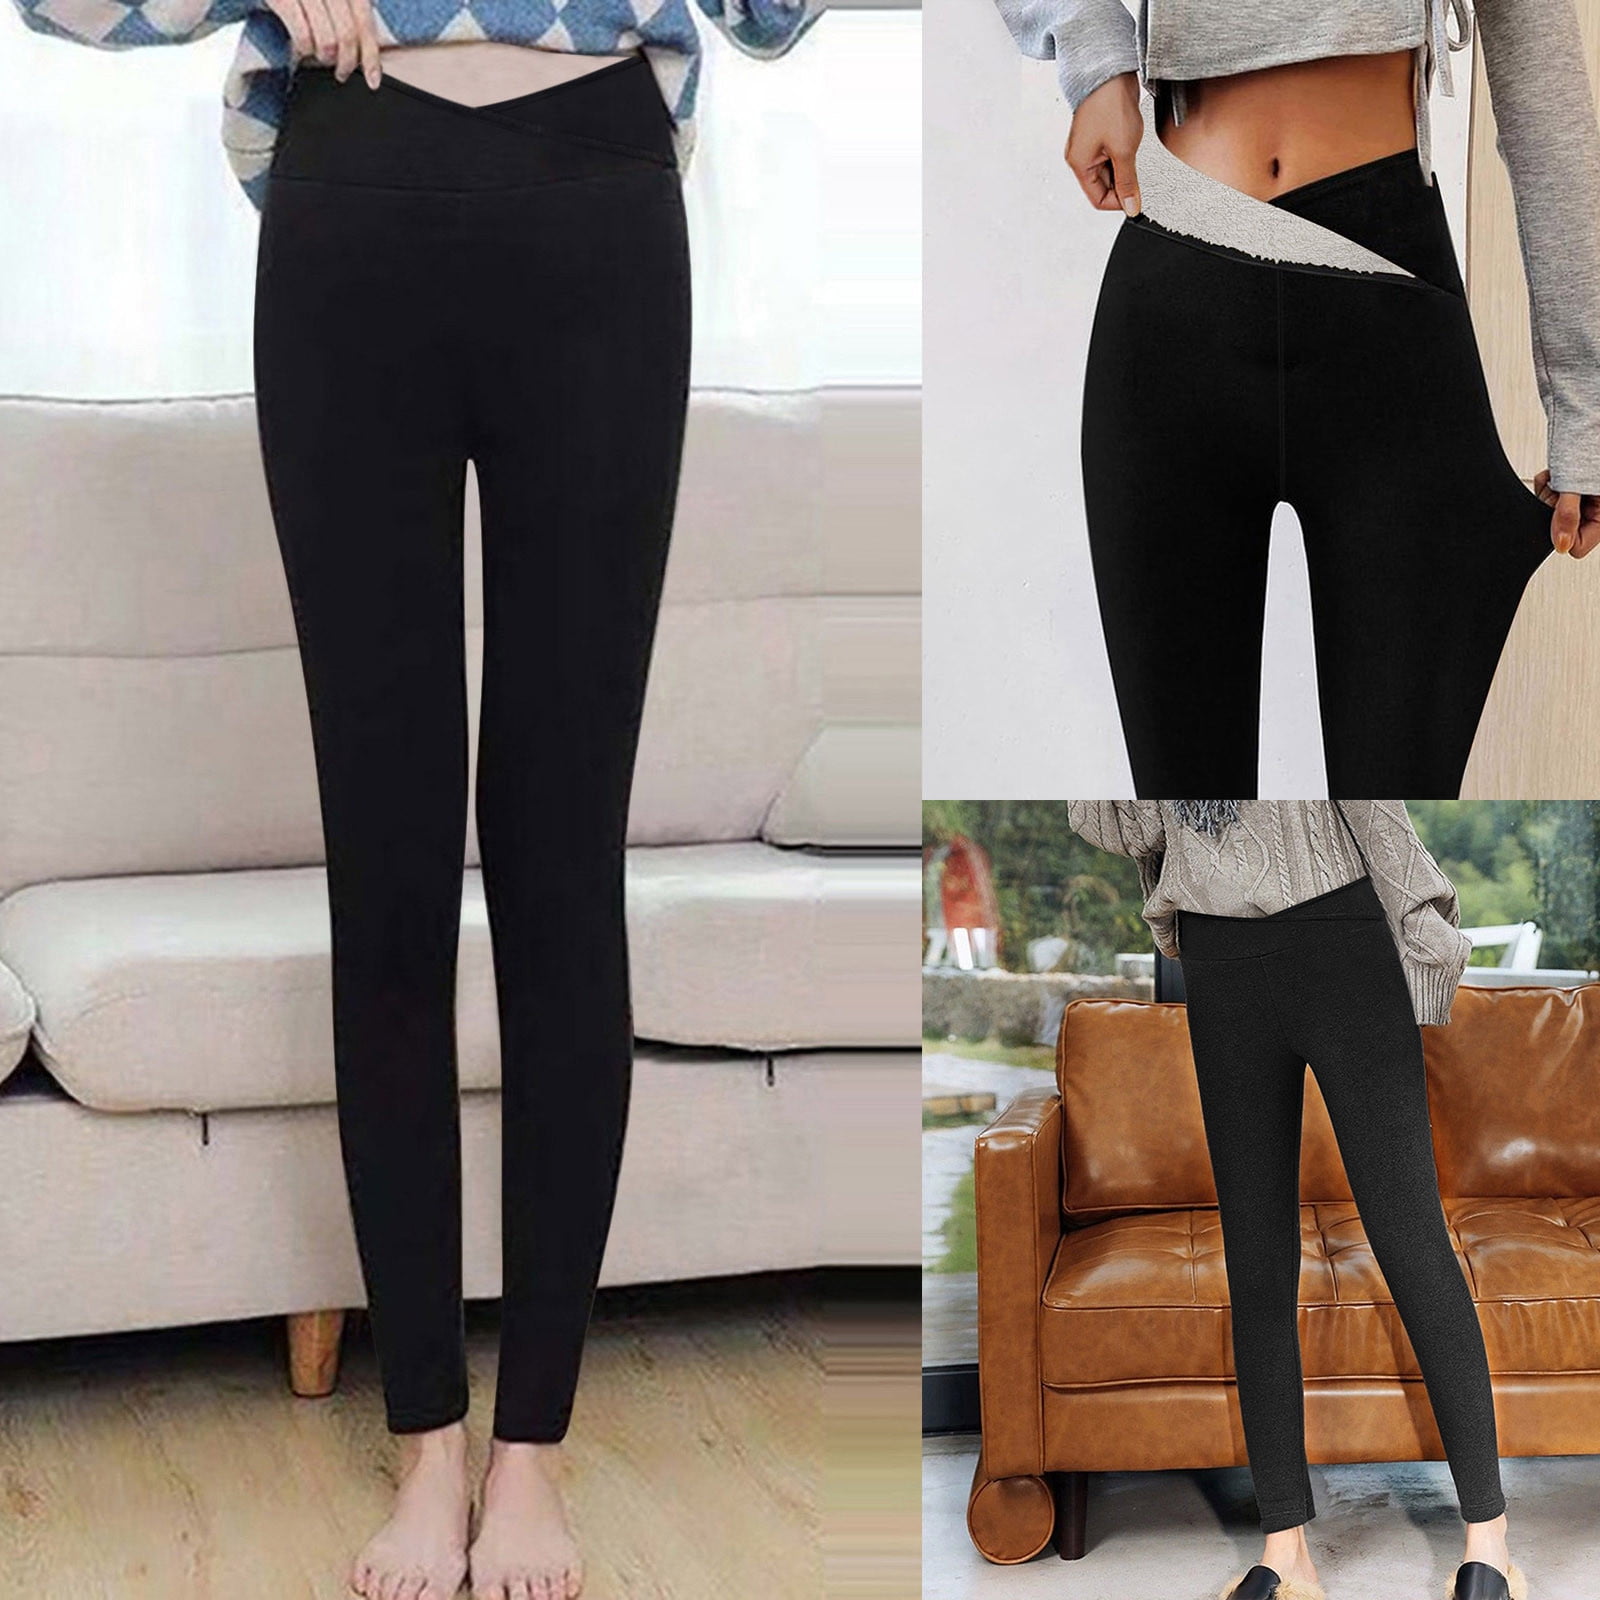 Winter Fleece Lined Leggings For Women, High Waist And Thermal